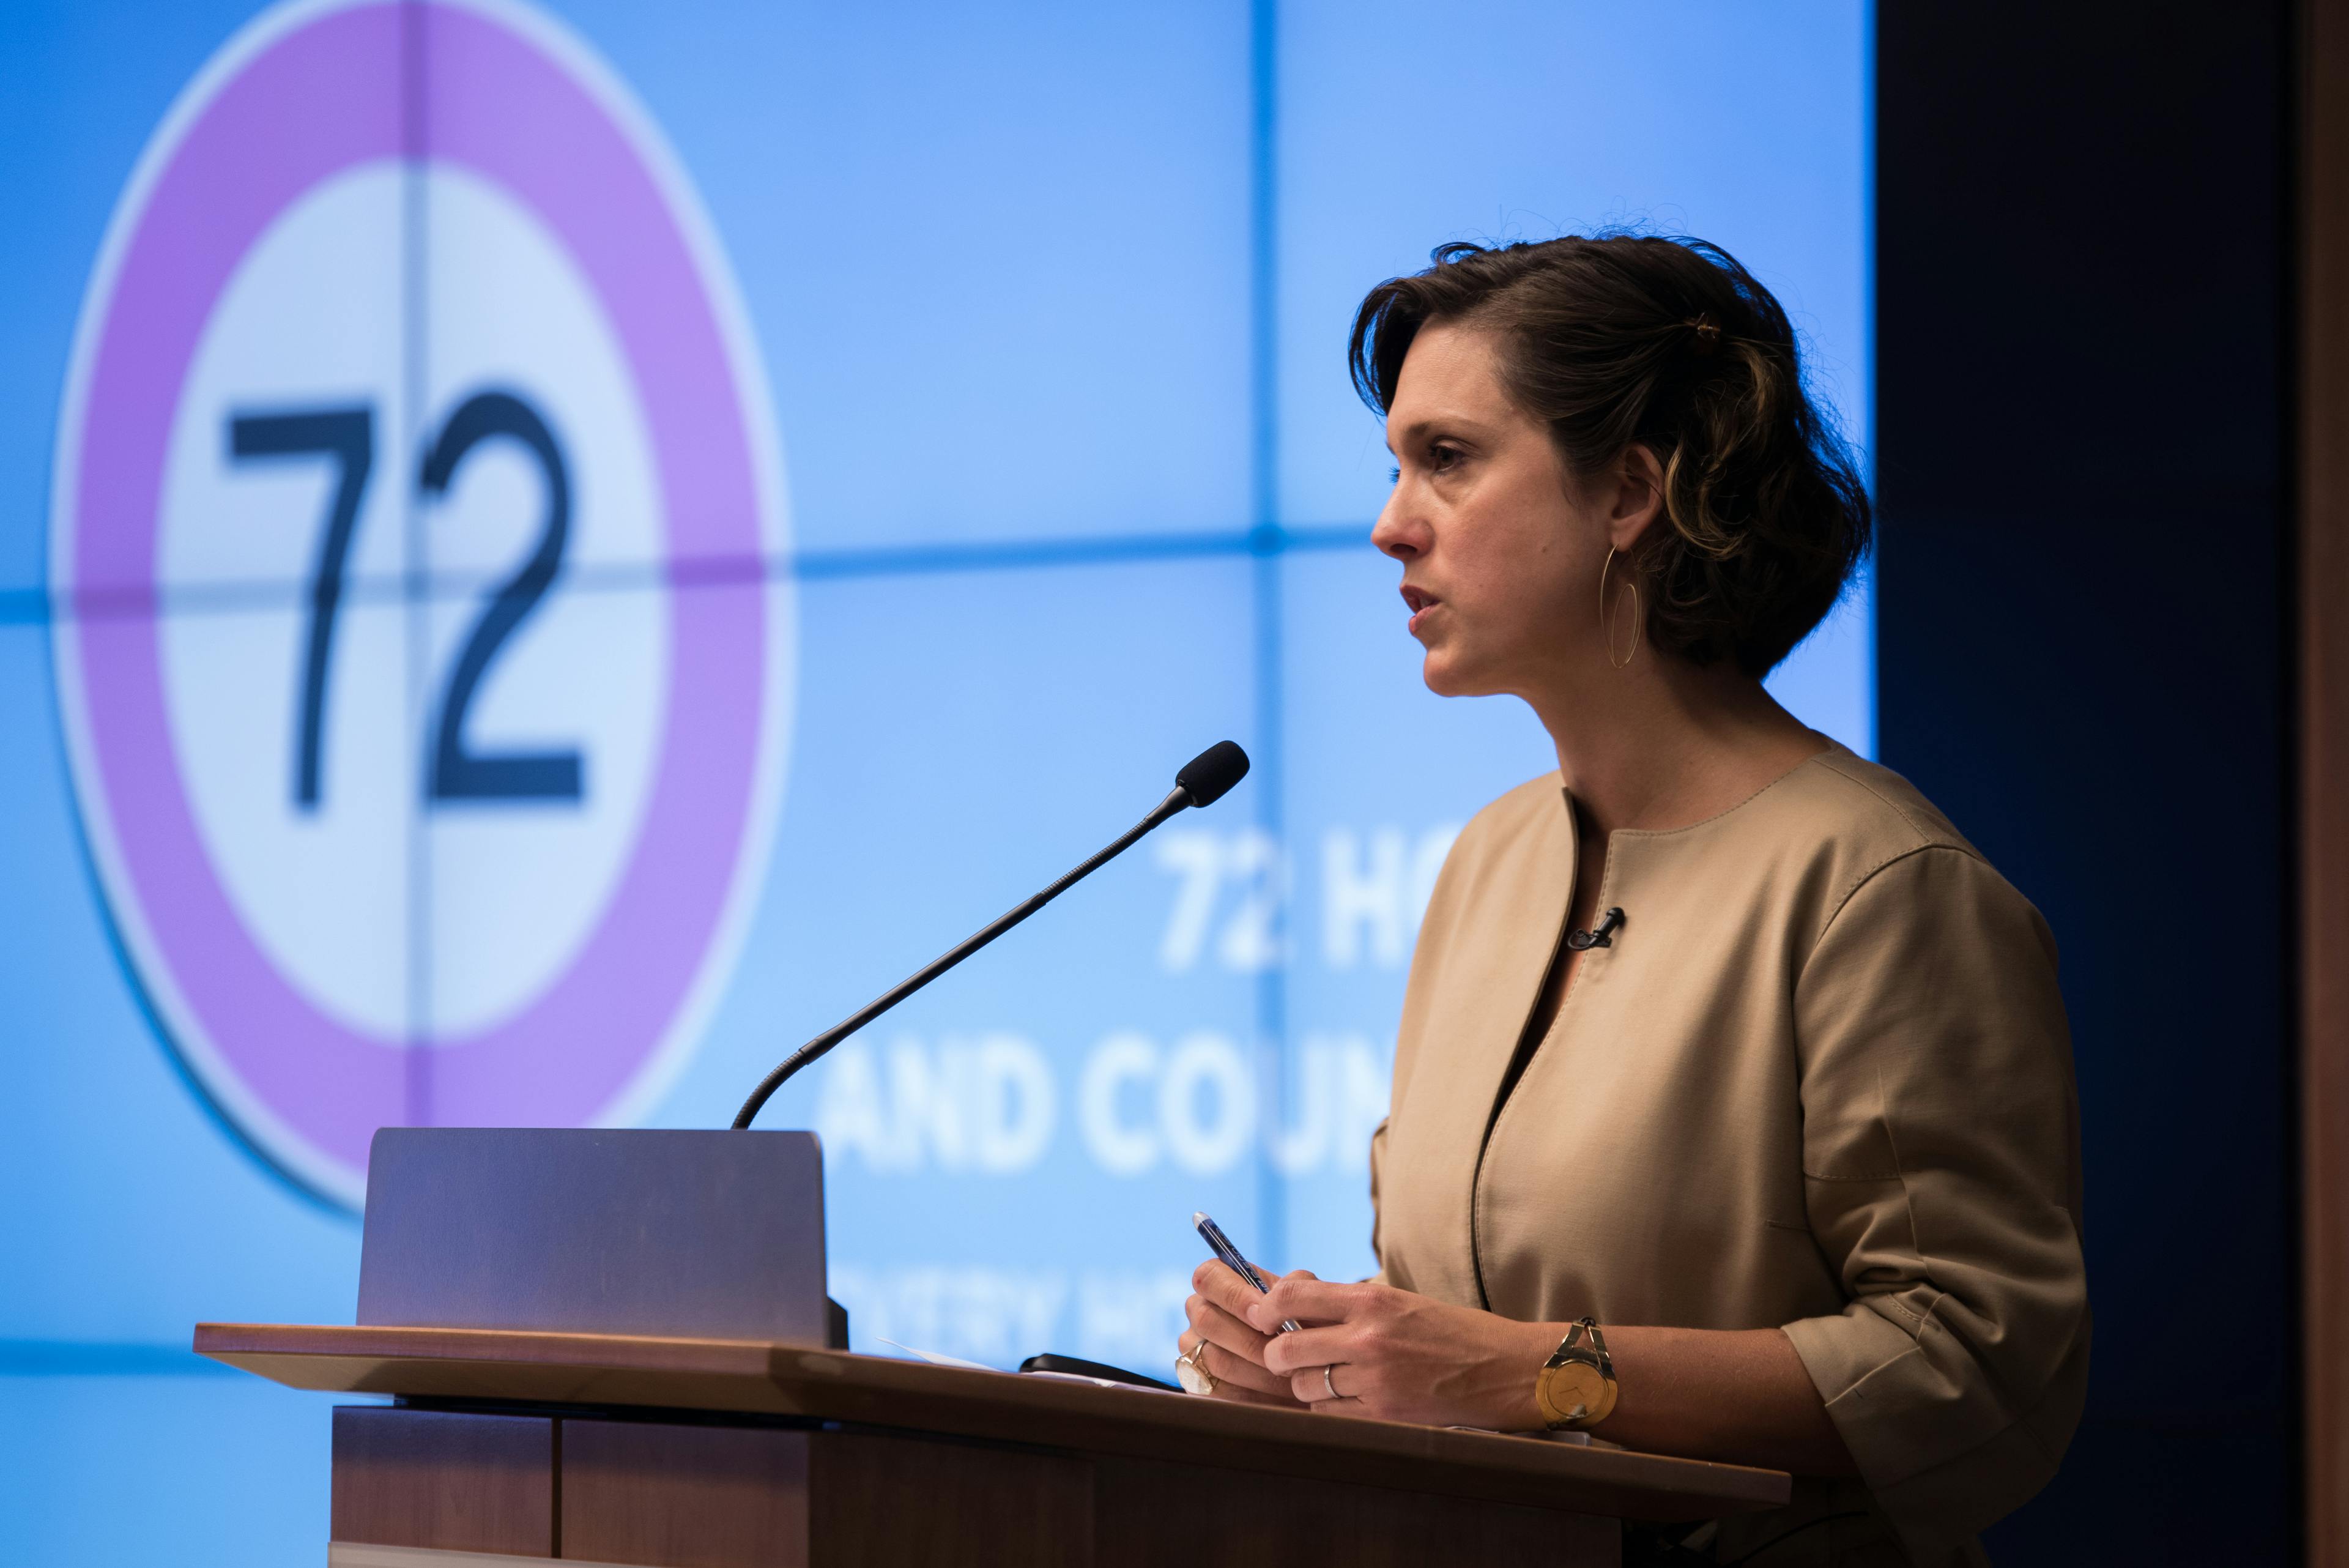 Daniela Ligiero speaking during an Every Hour Matters event